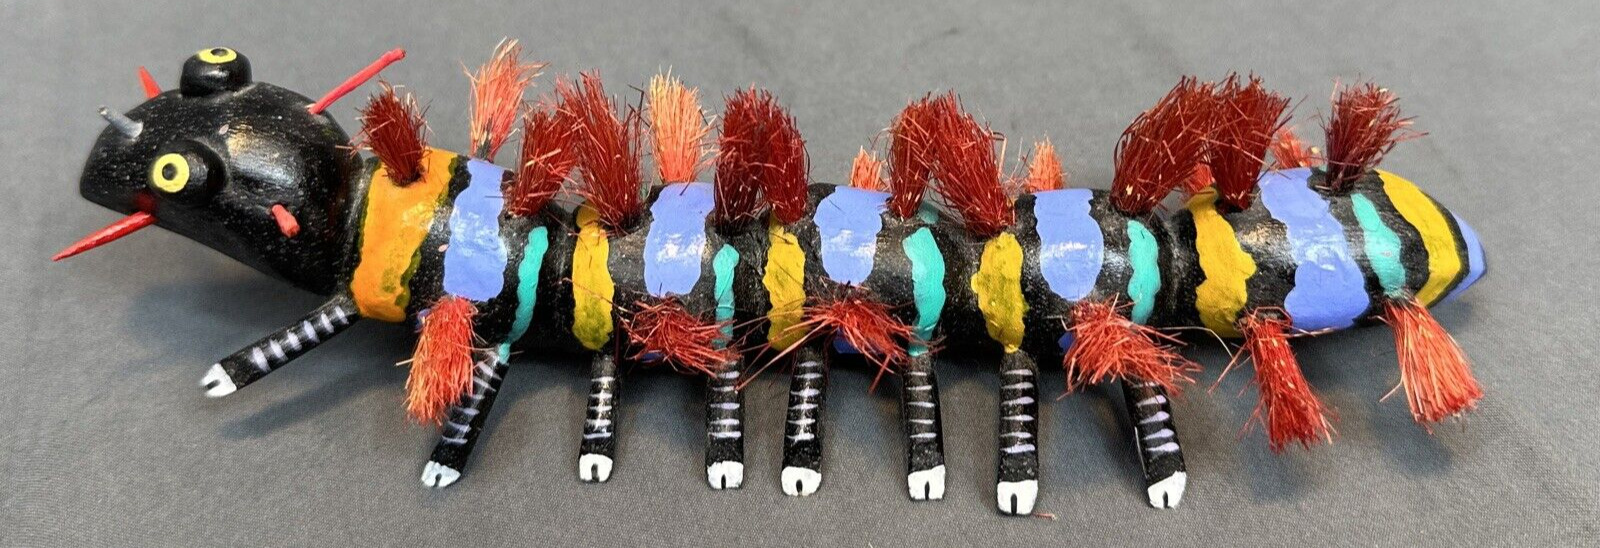 Oaxacan Wood Carving Prickly Centipede  by Albina Ortiz VTG ****READ ALL